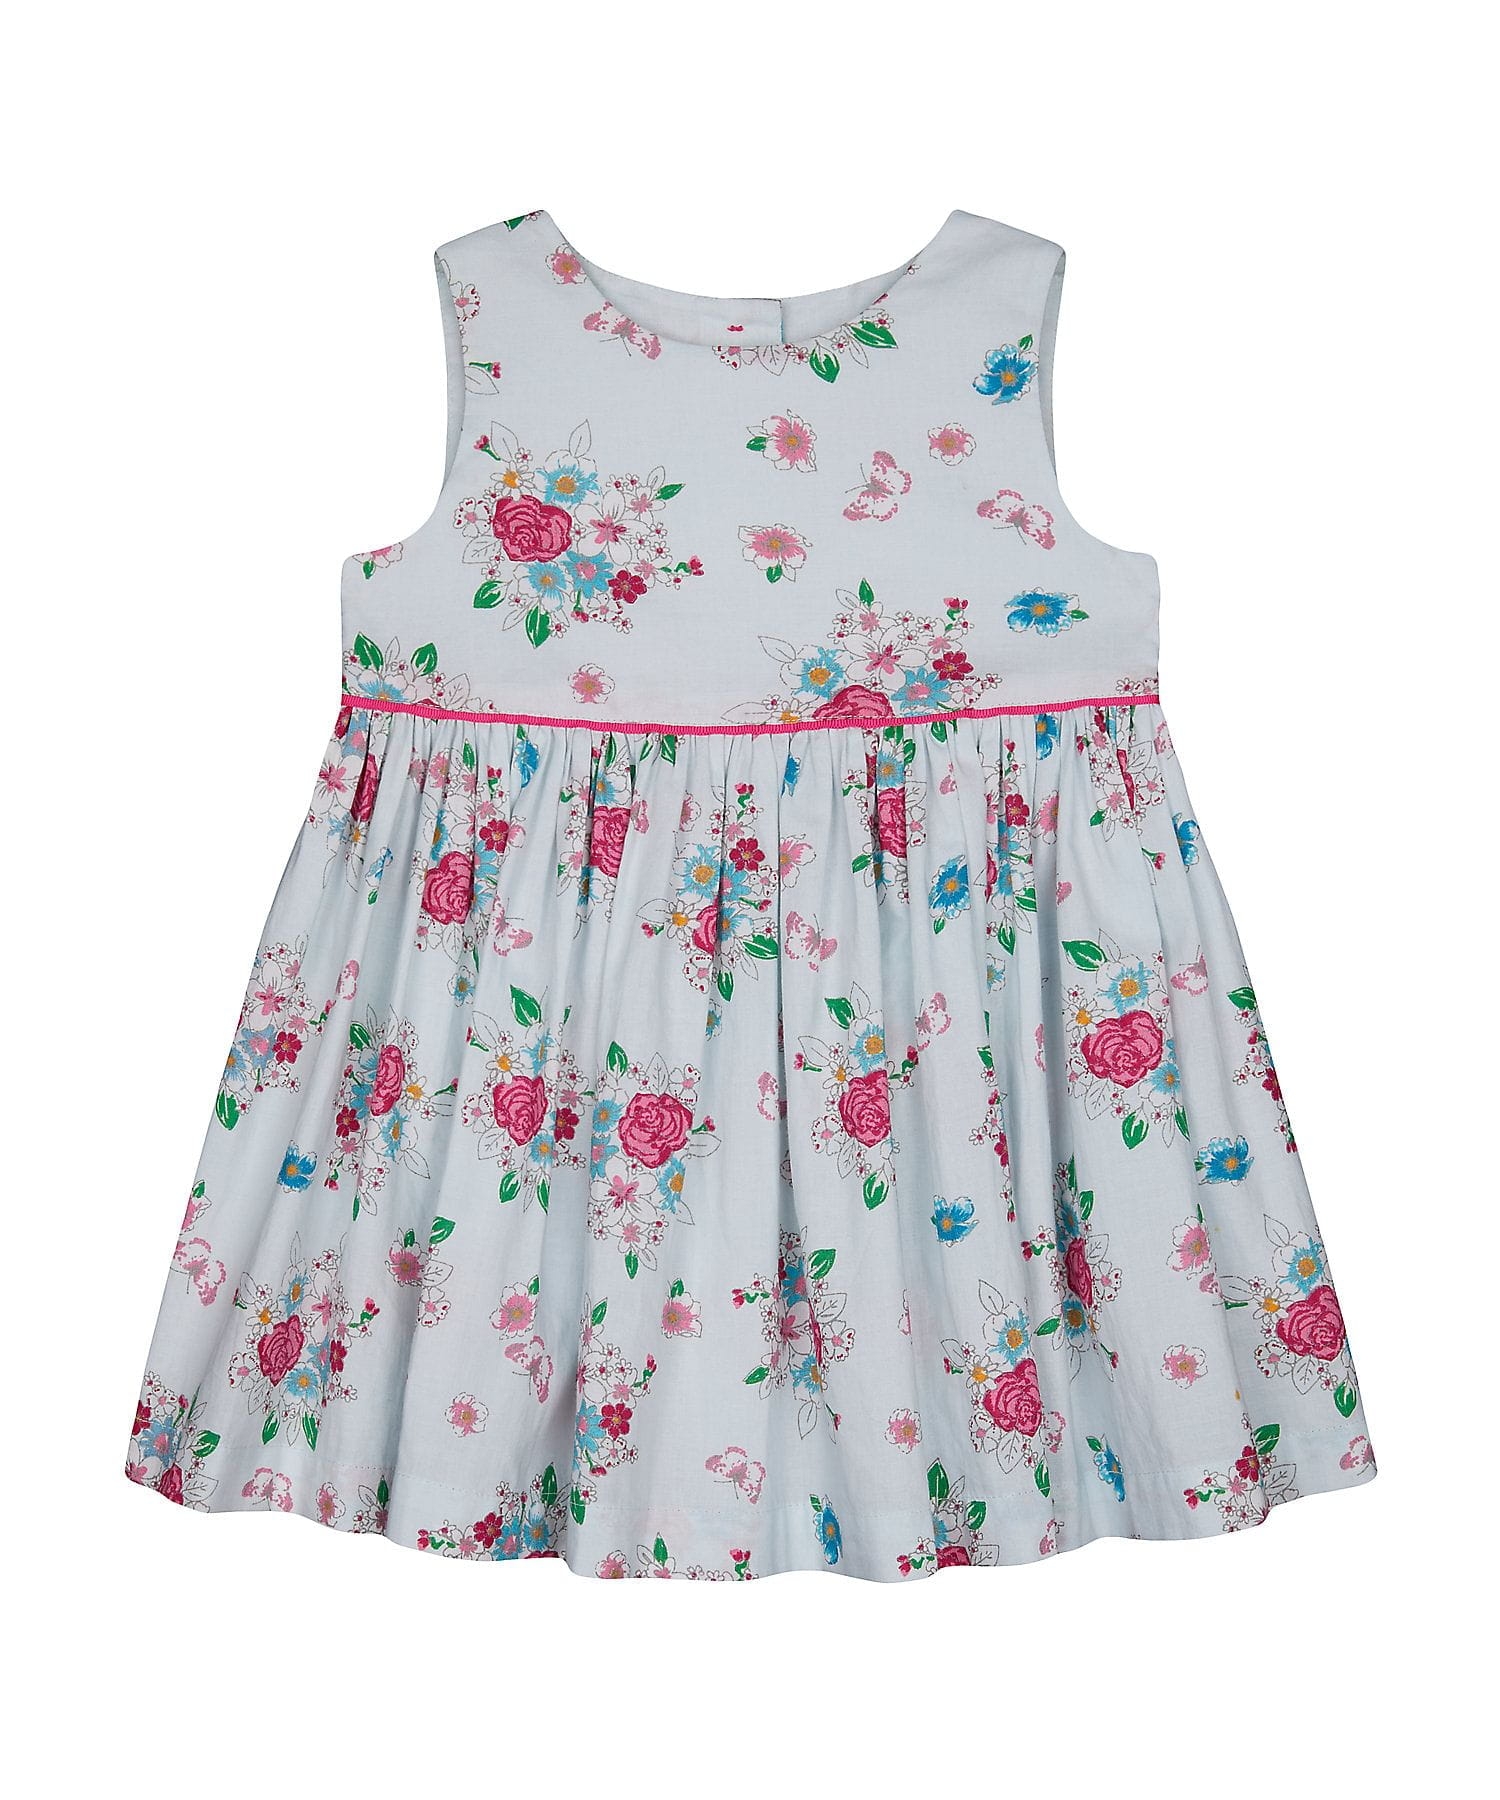 Mothercare | Turquoise Floral Dress 0